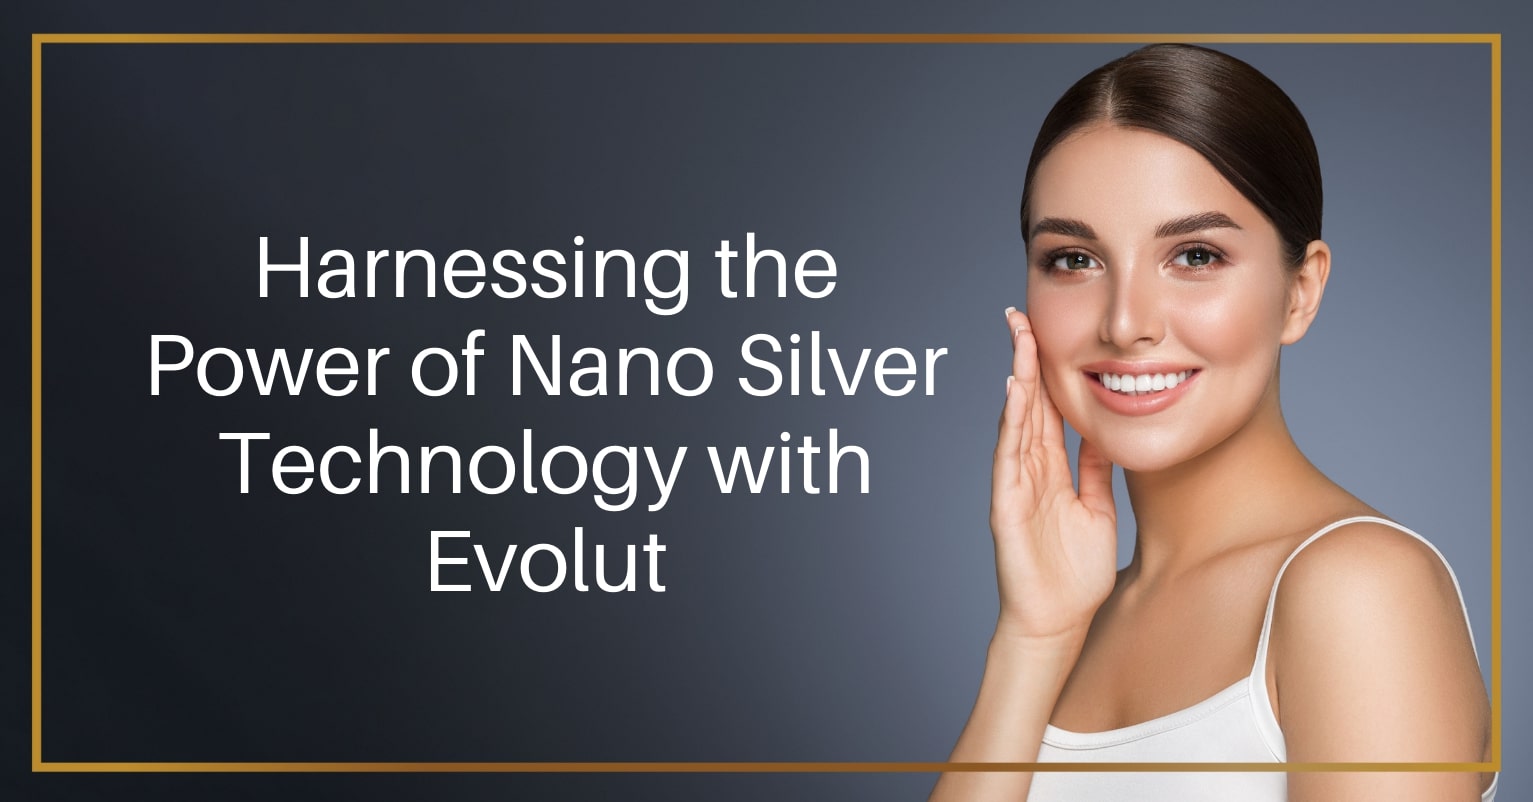 Harnessing the Power of Nano Silver Technology with Evolut